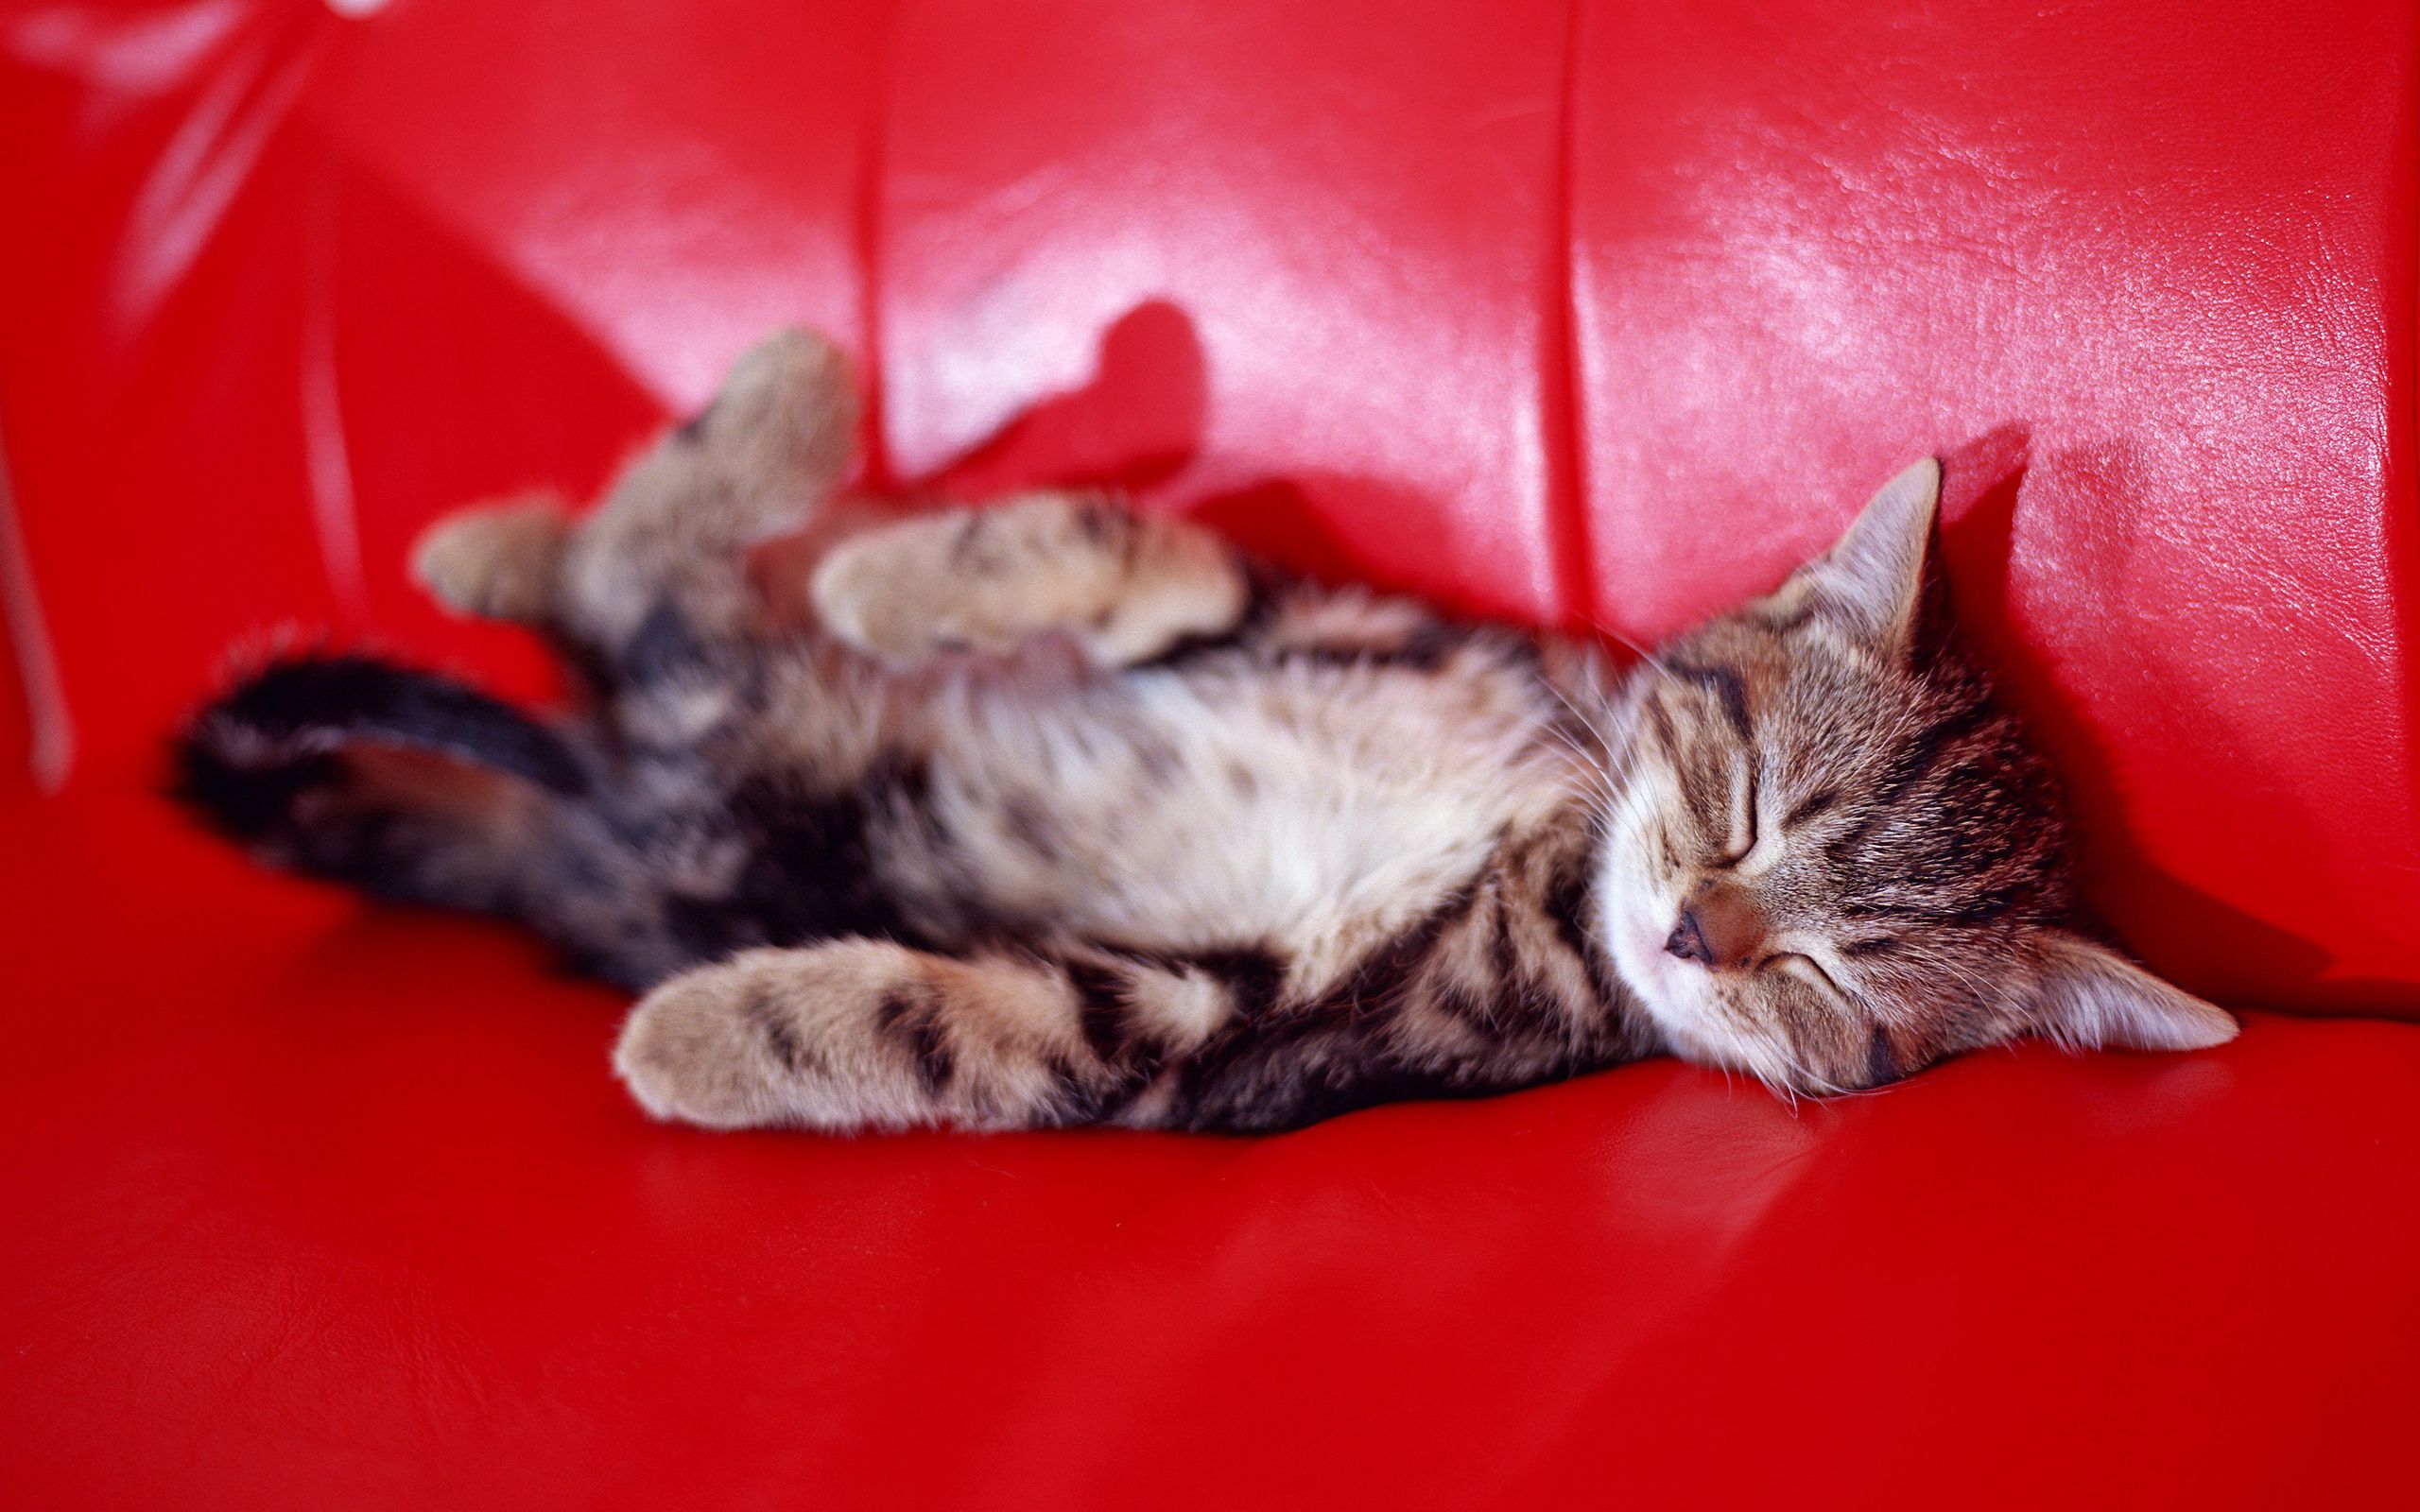 HD wallpaper, Sleeping, Kitty, Couch